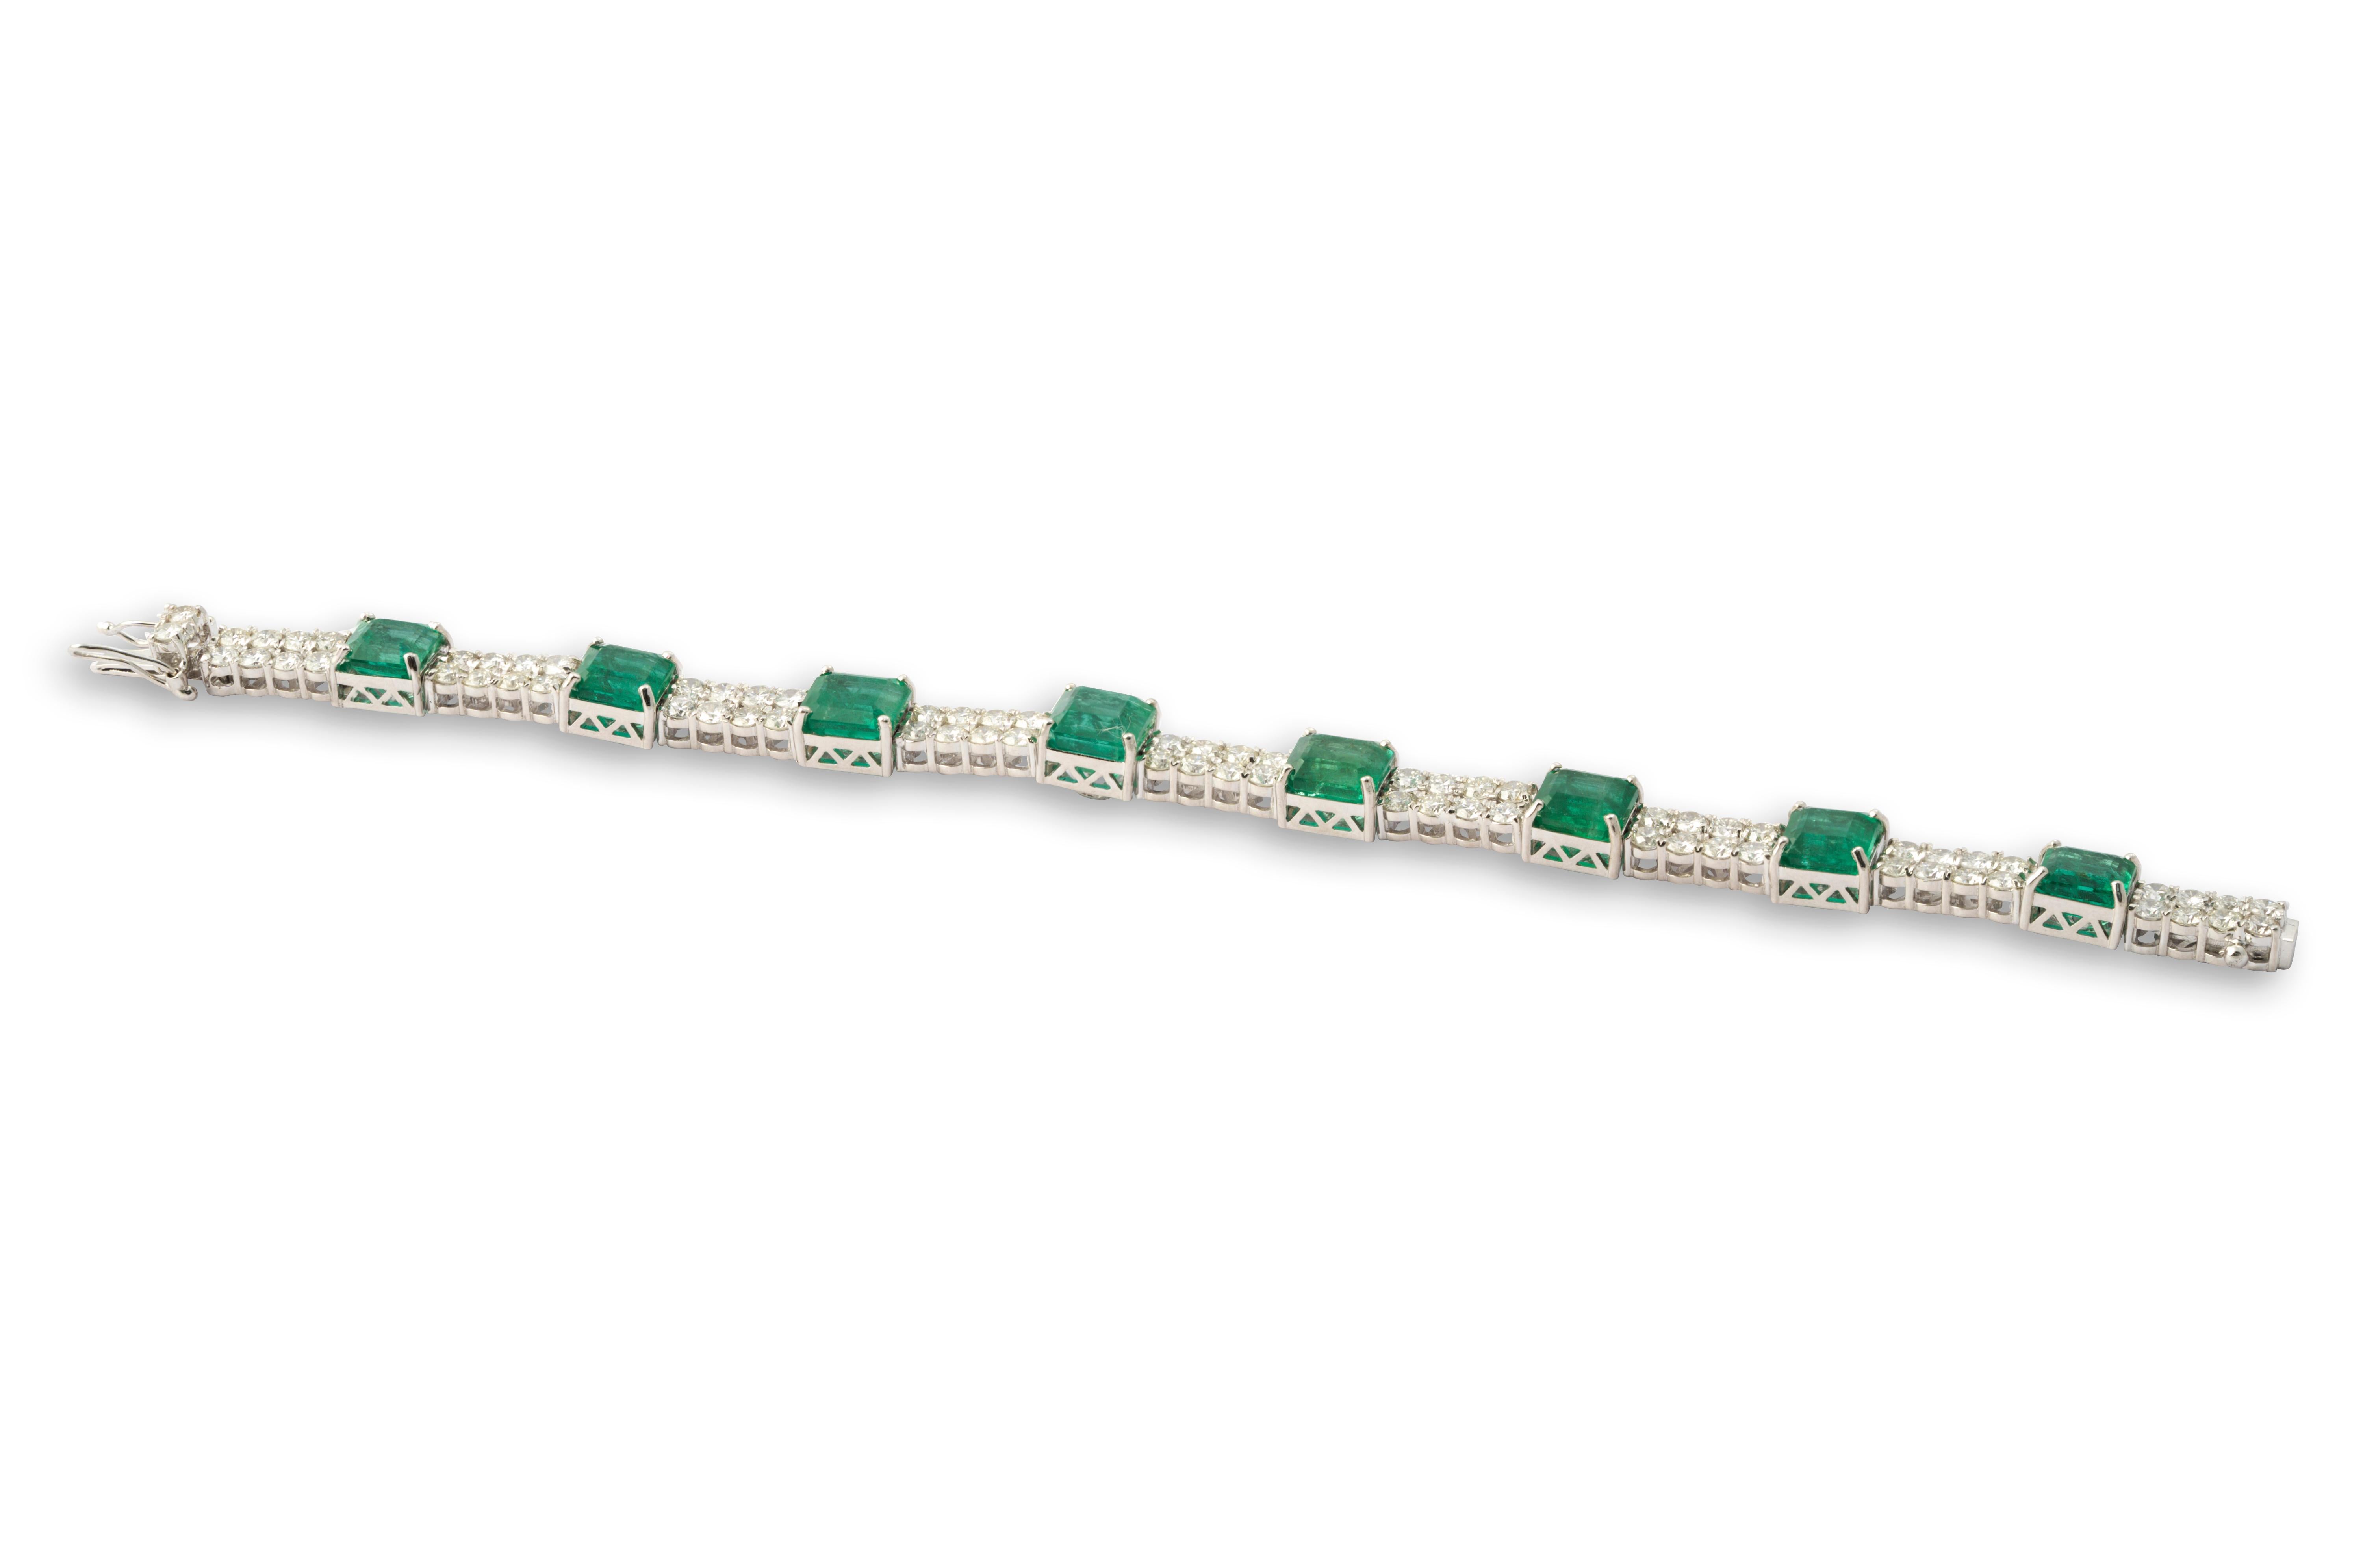 Emerald Cut Natural Zambian Emerald with Diamonds and 14k Gold For Sale